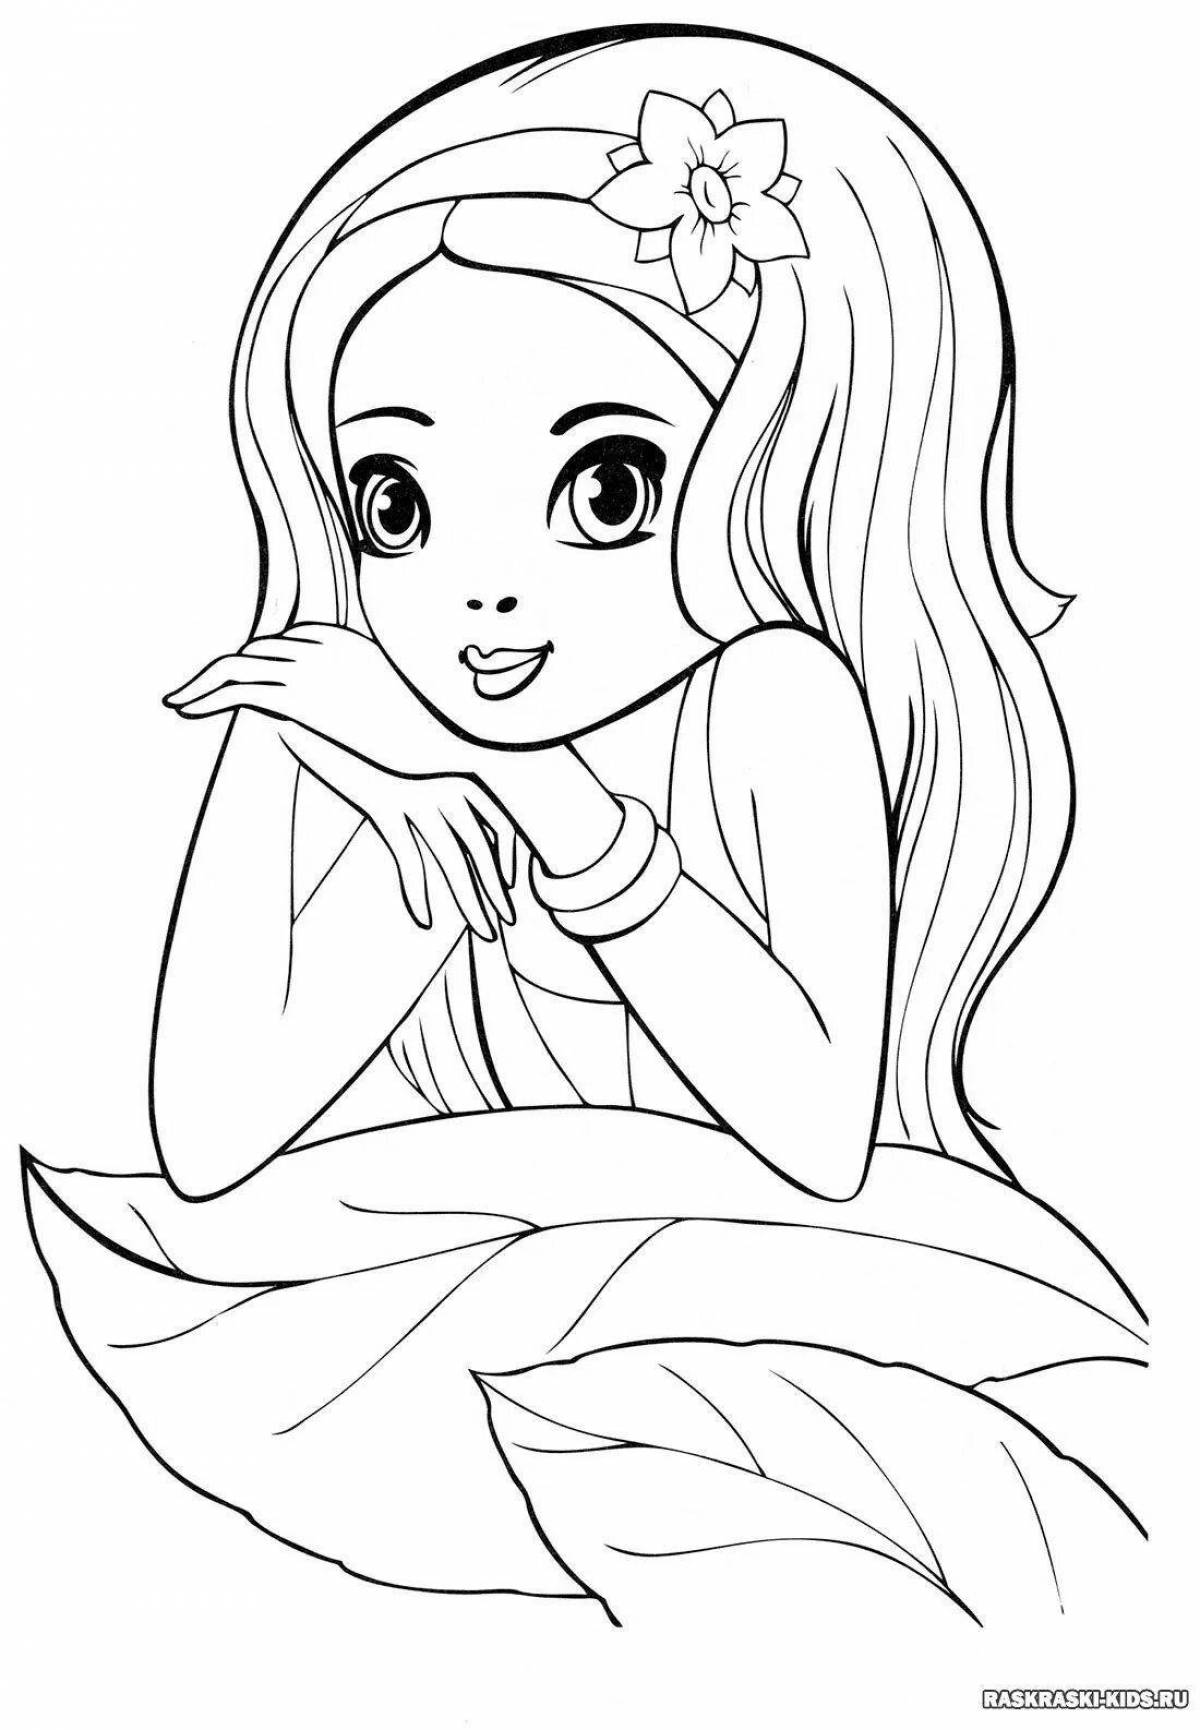 Coloring pages for girls 7 8